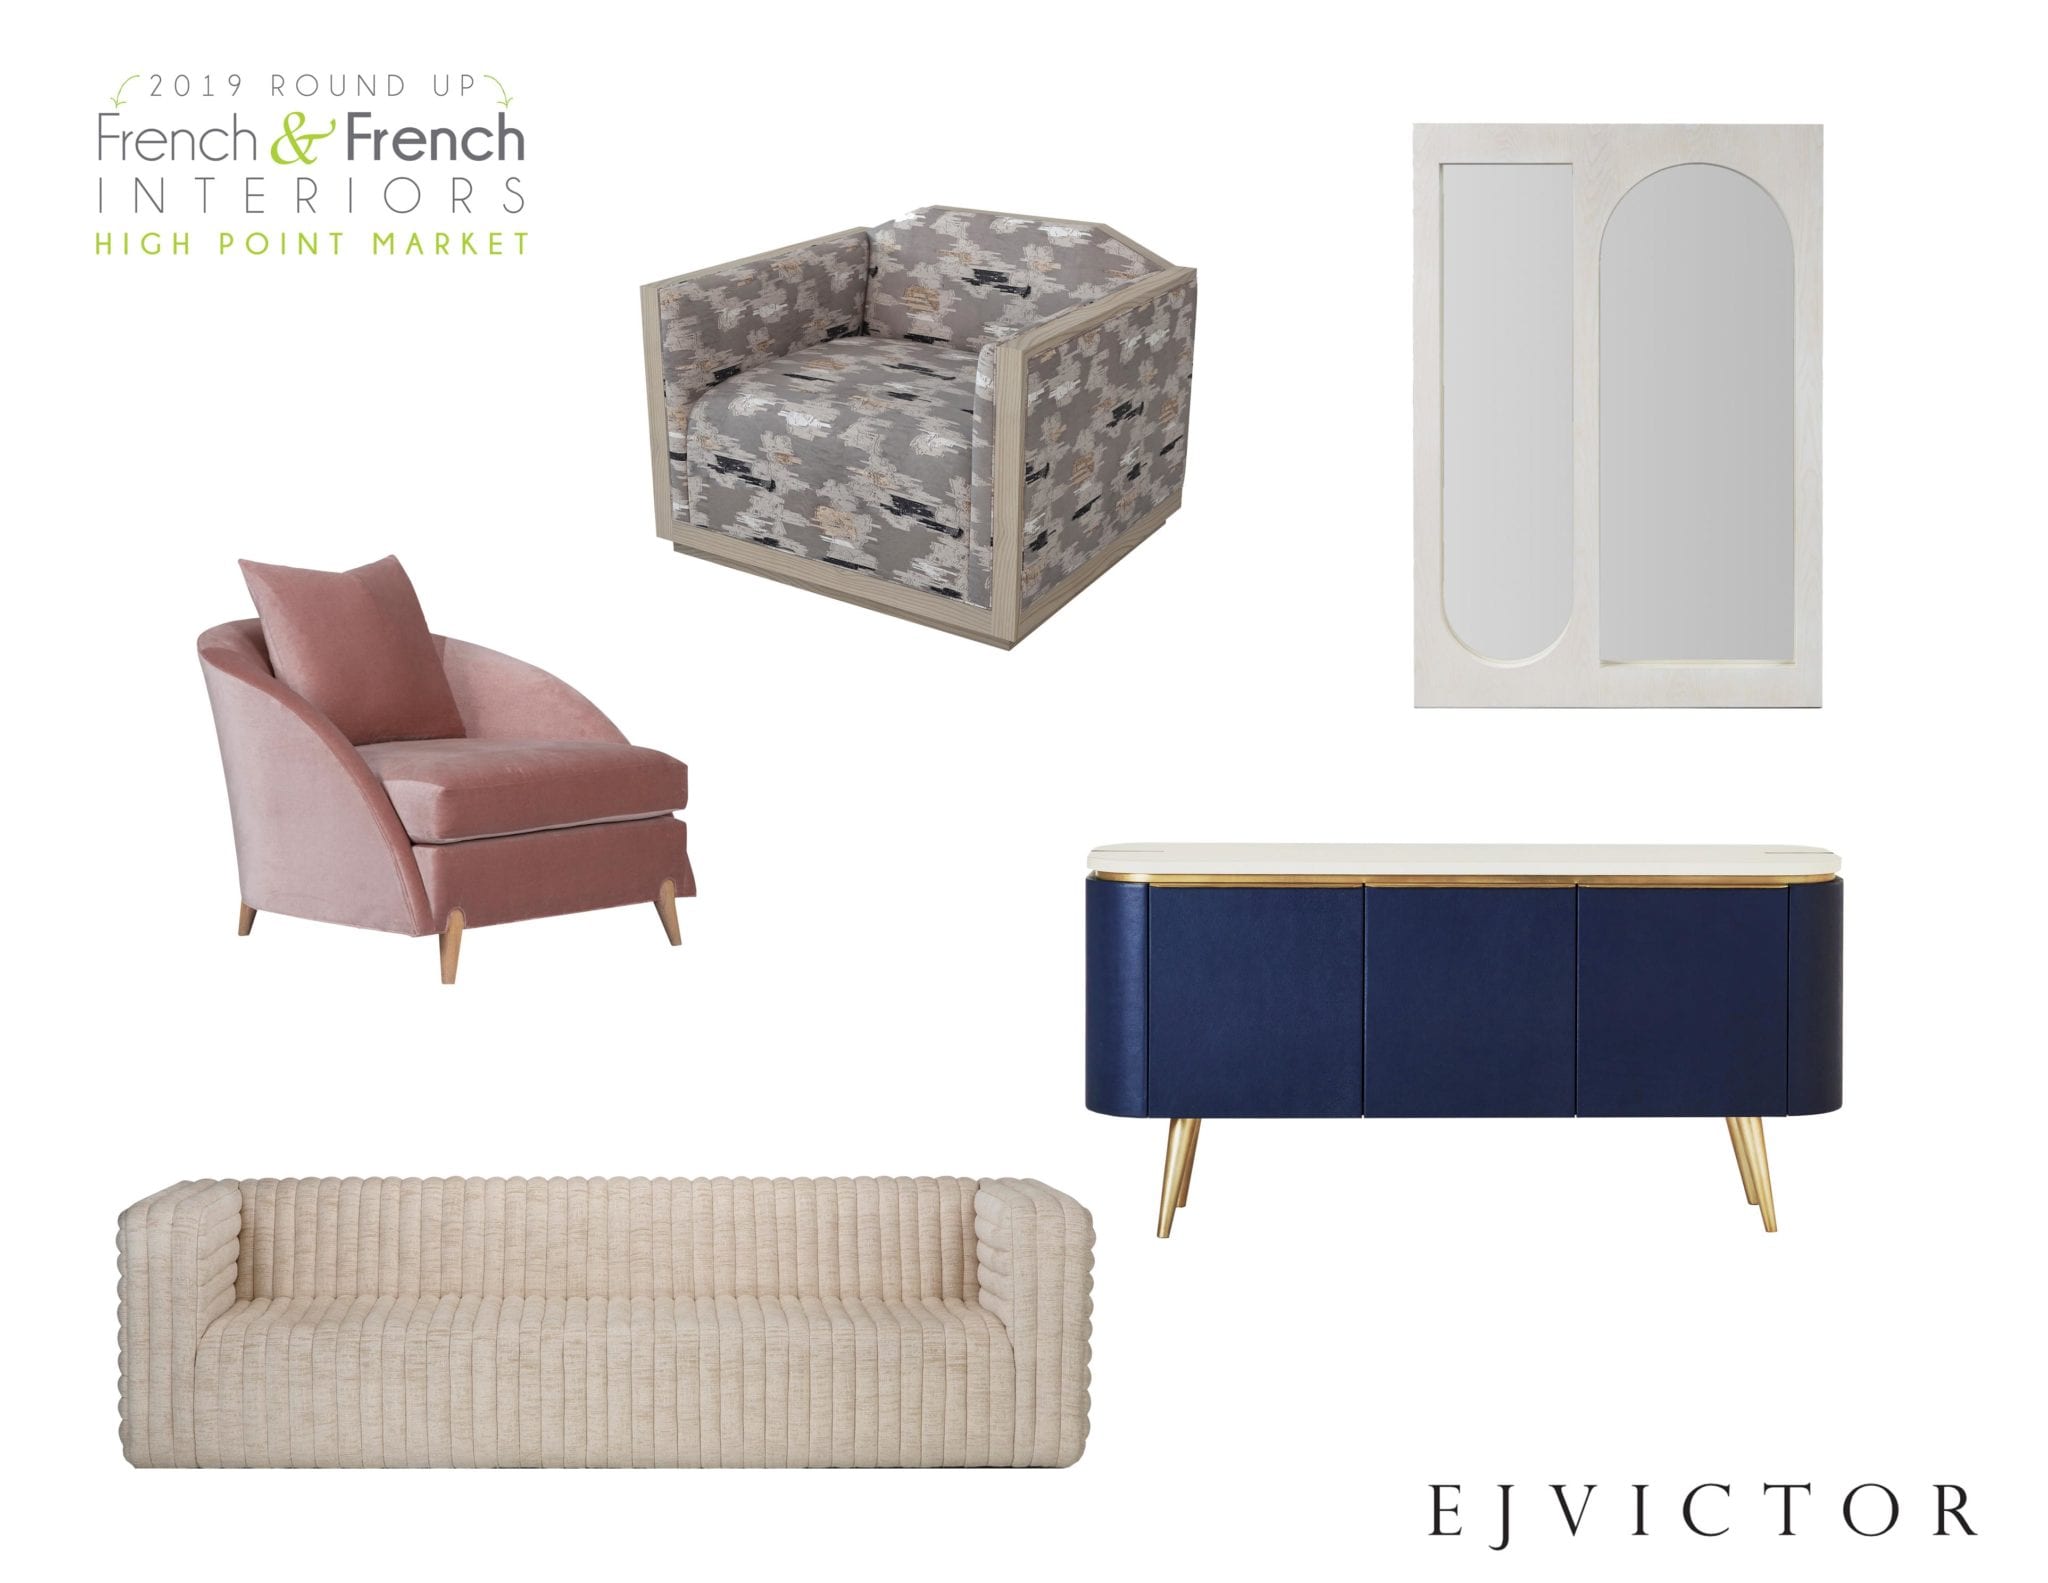 graphic for 2019 Round up from French & French Interiors High Point Market with different furniture items from Ejvictor